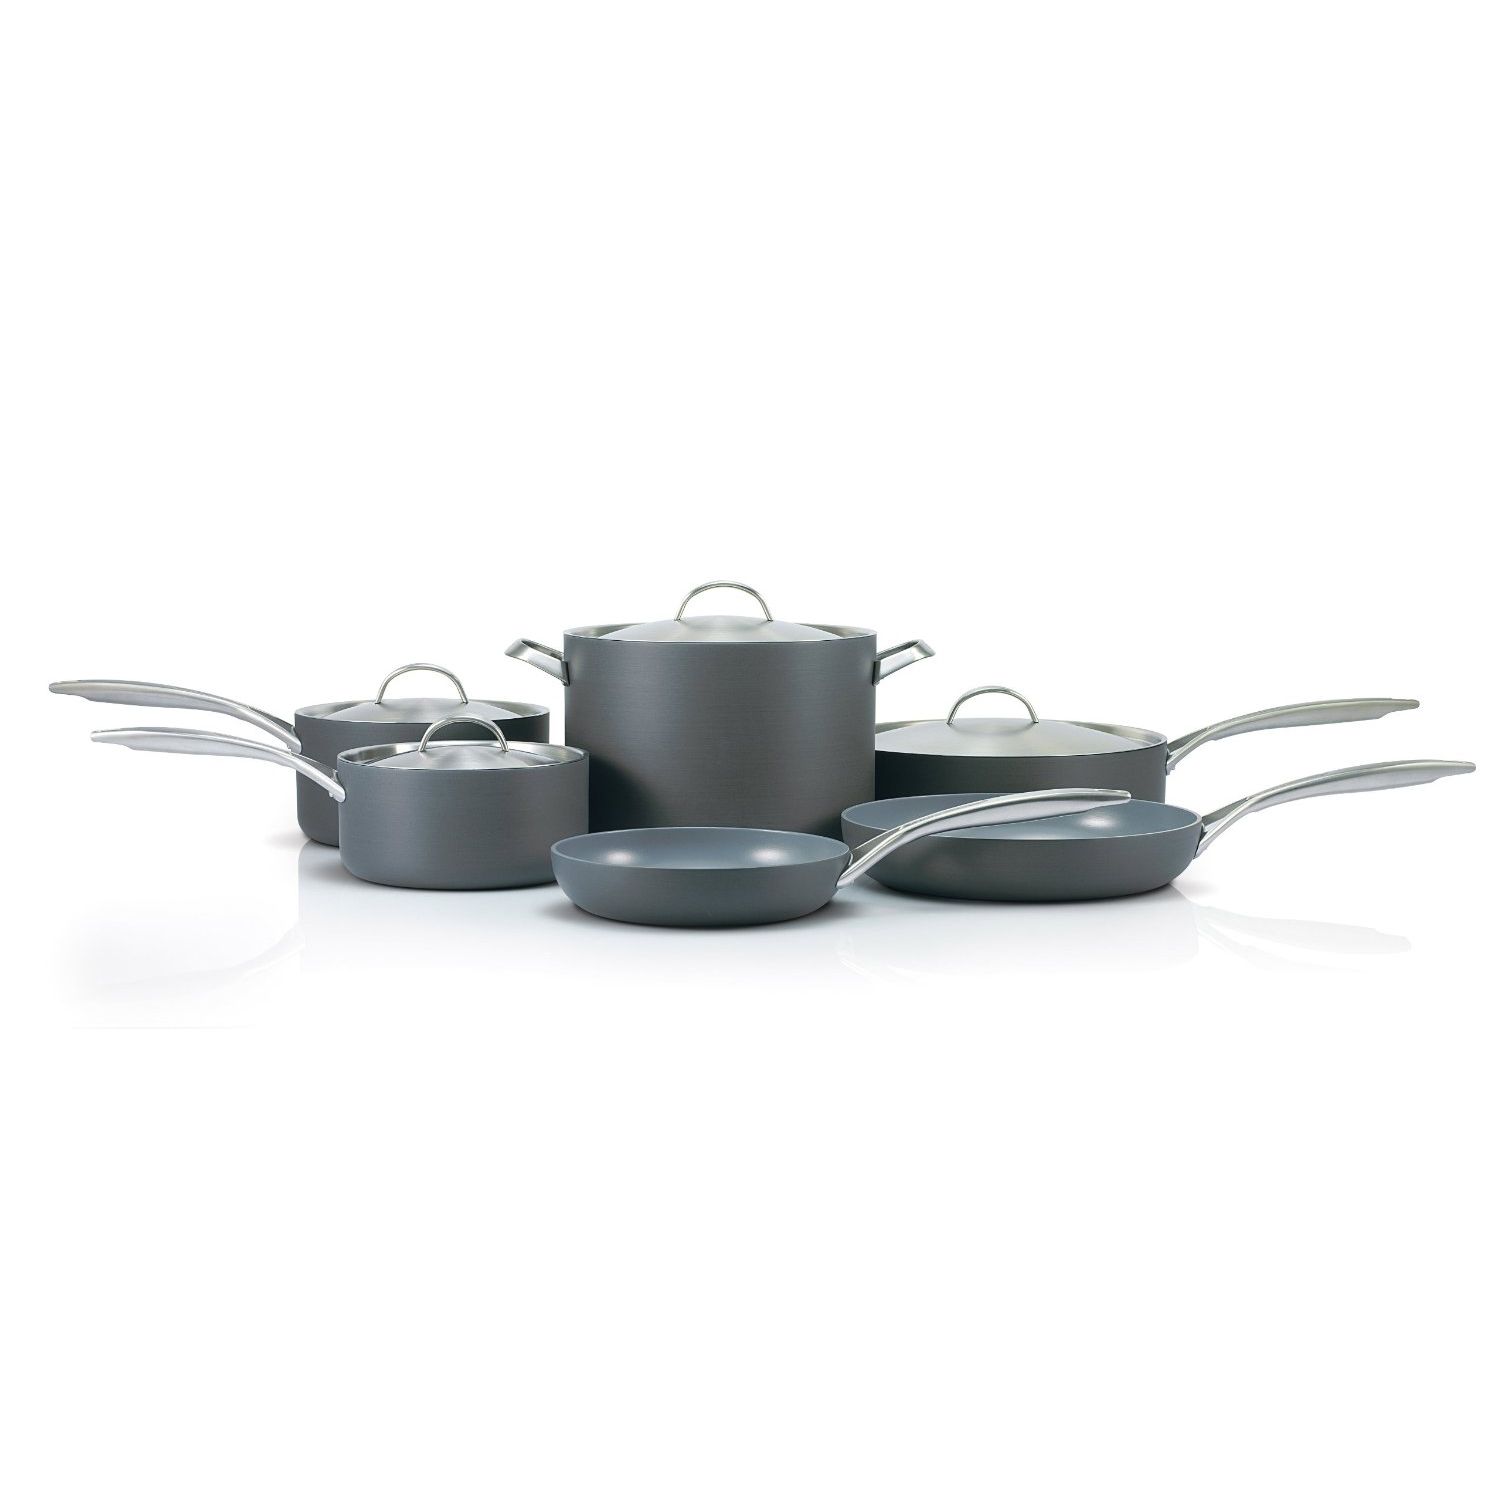 The Cookware Company The Original Green Pan Review